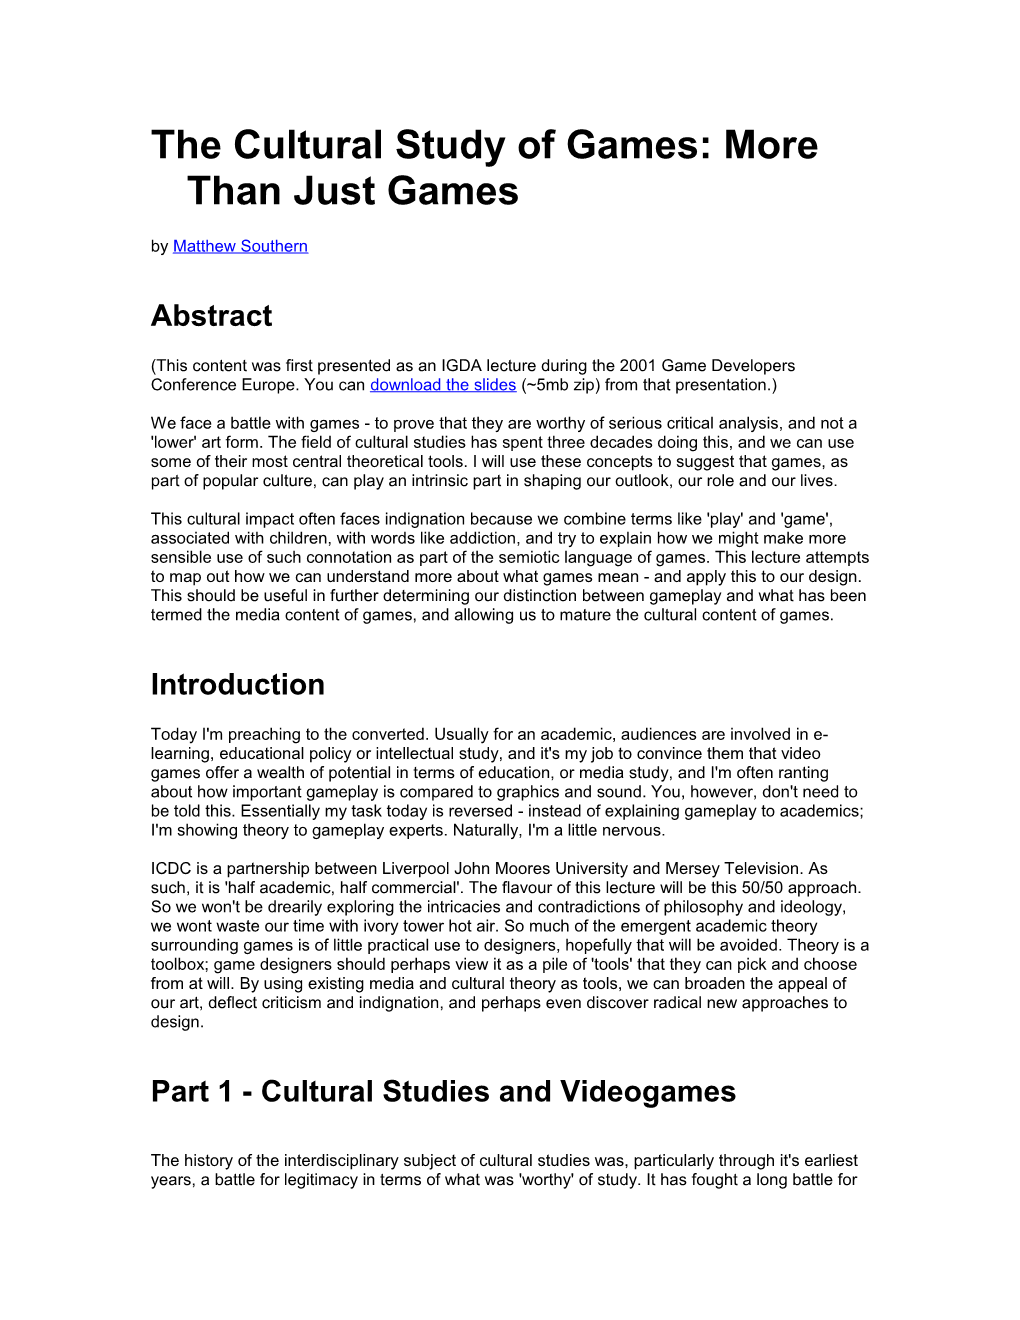 The Cultural Study of Games: More Than Just Games